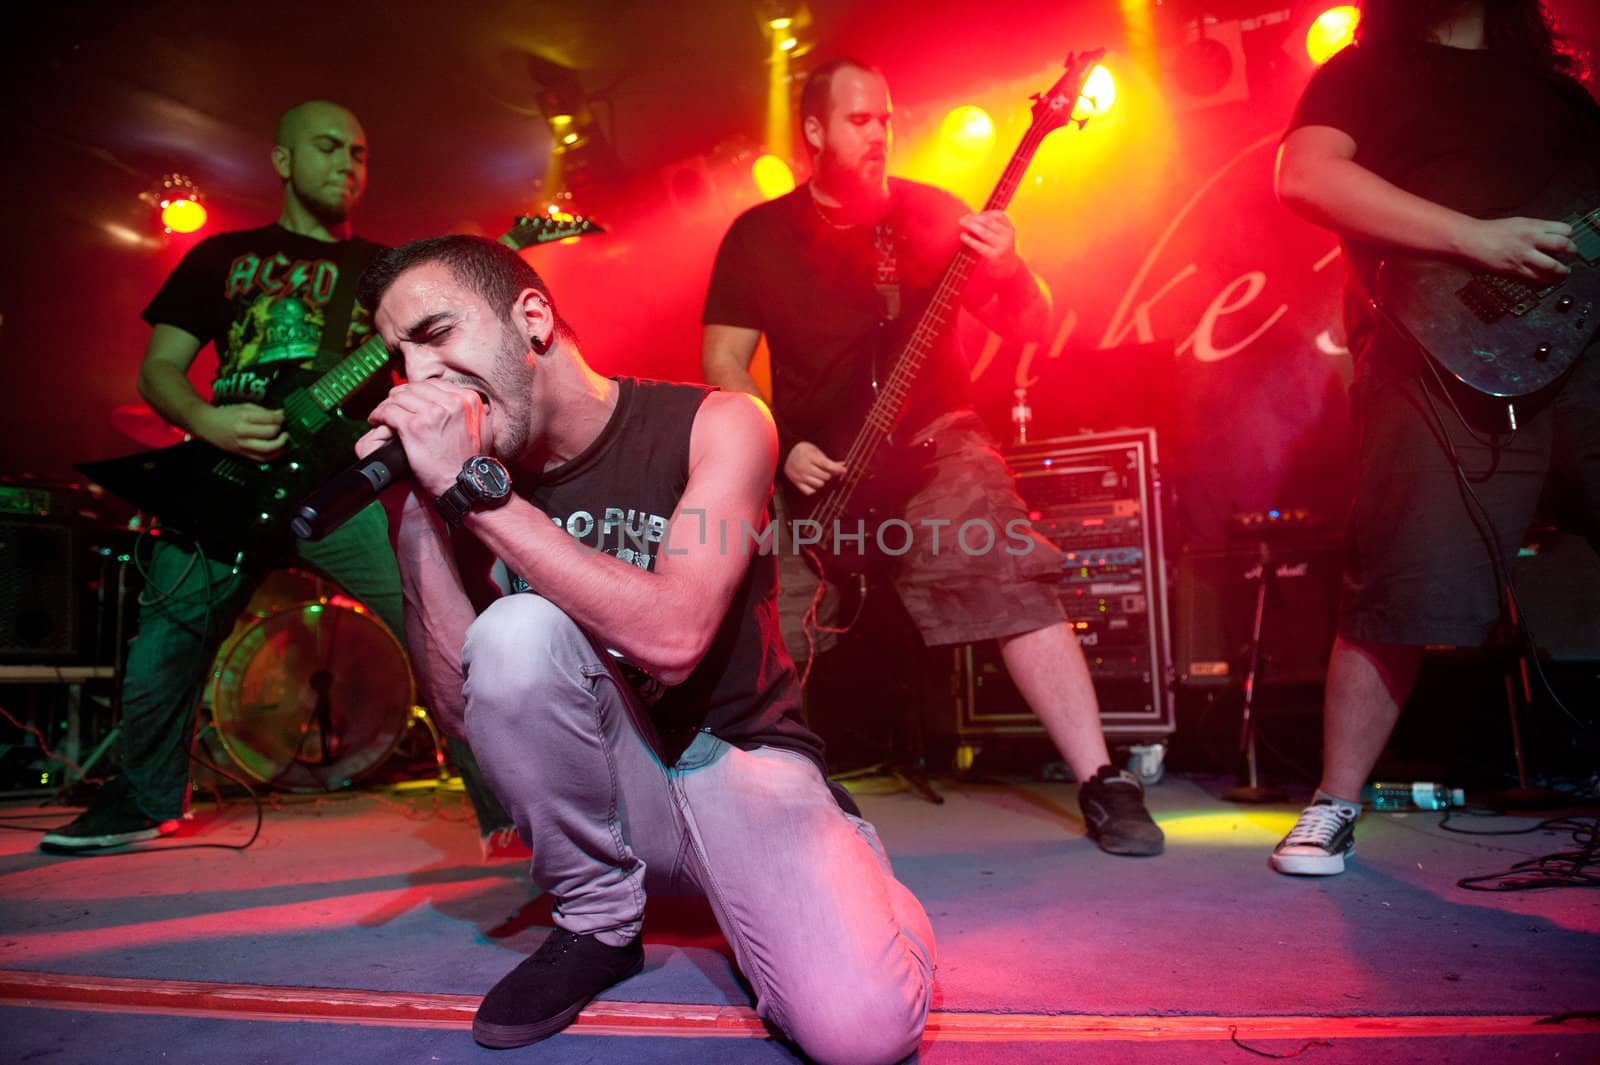 CANARY ISLANDS – DECEMBER 2: Singer Kevin Falcon in front, from the Spanish band An Endless Path, performing onstage during Hard & Heavy Meeting December 2, 2011 in Canary islands, Spain
